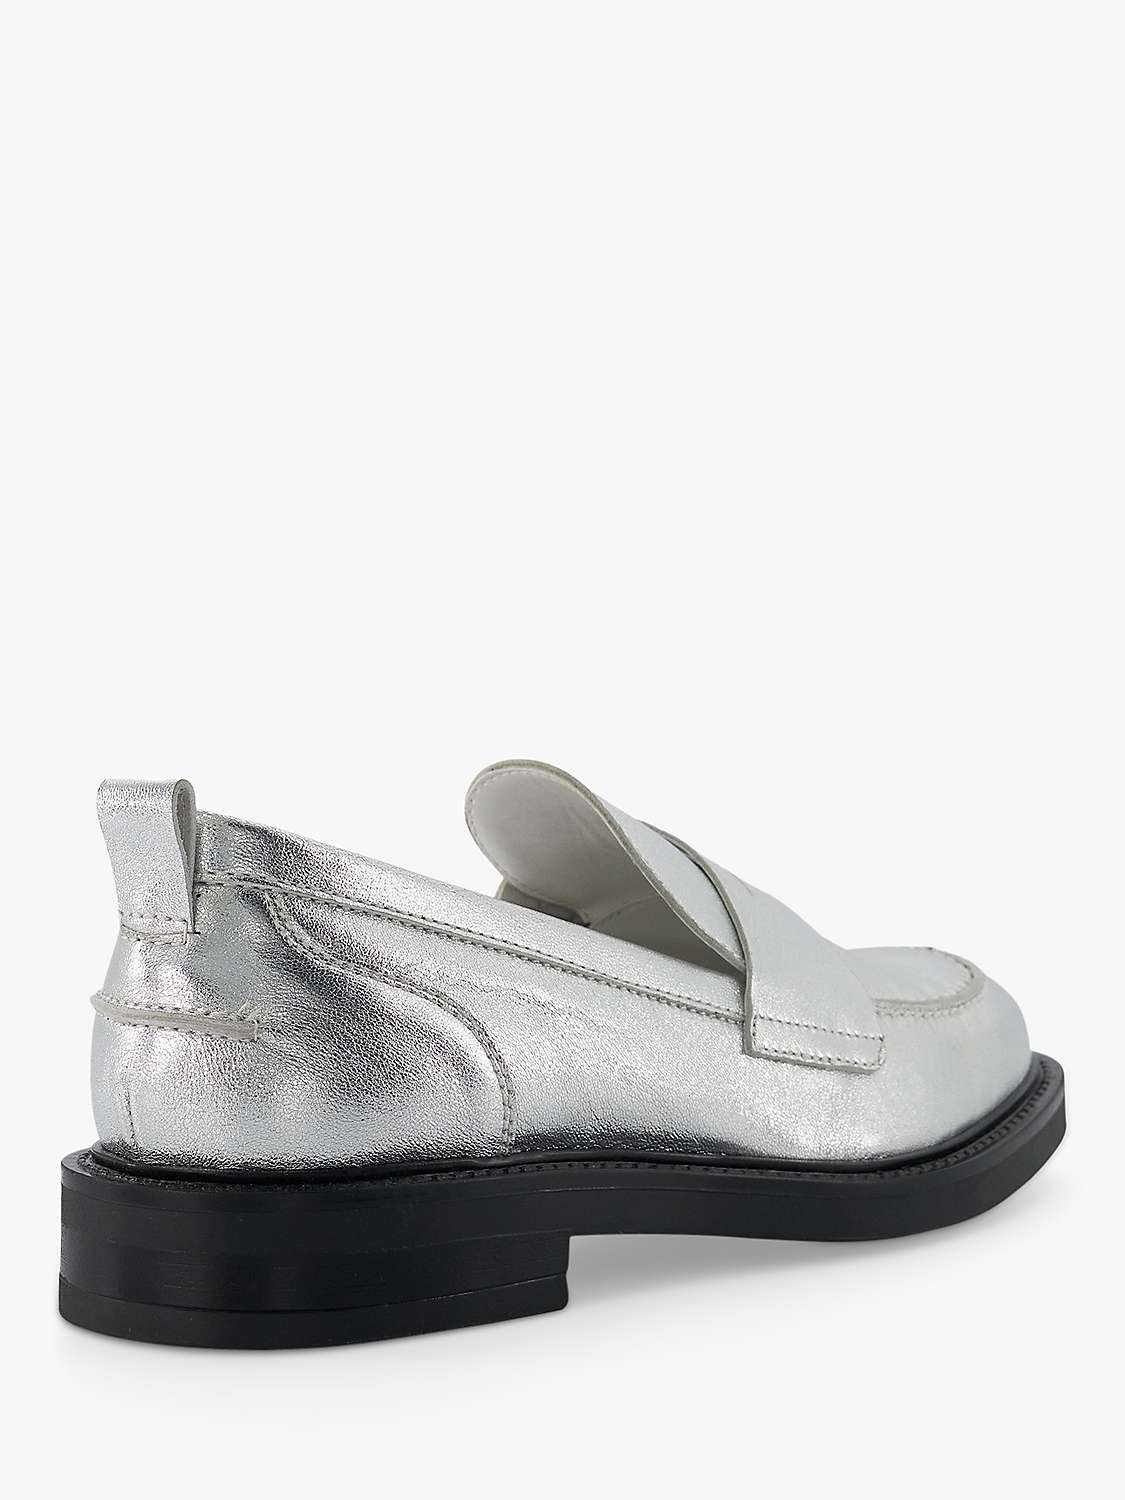 Buy Dune Geeno Leather Loafers Online at johnlewis.com